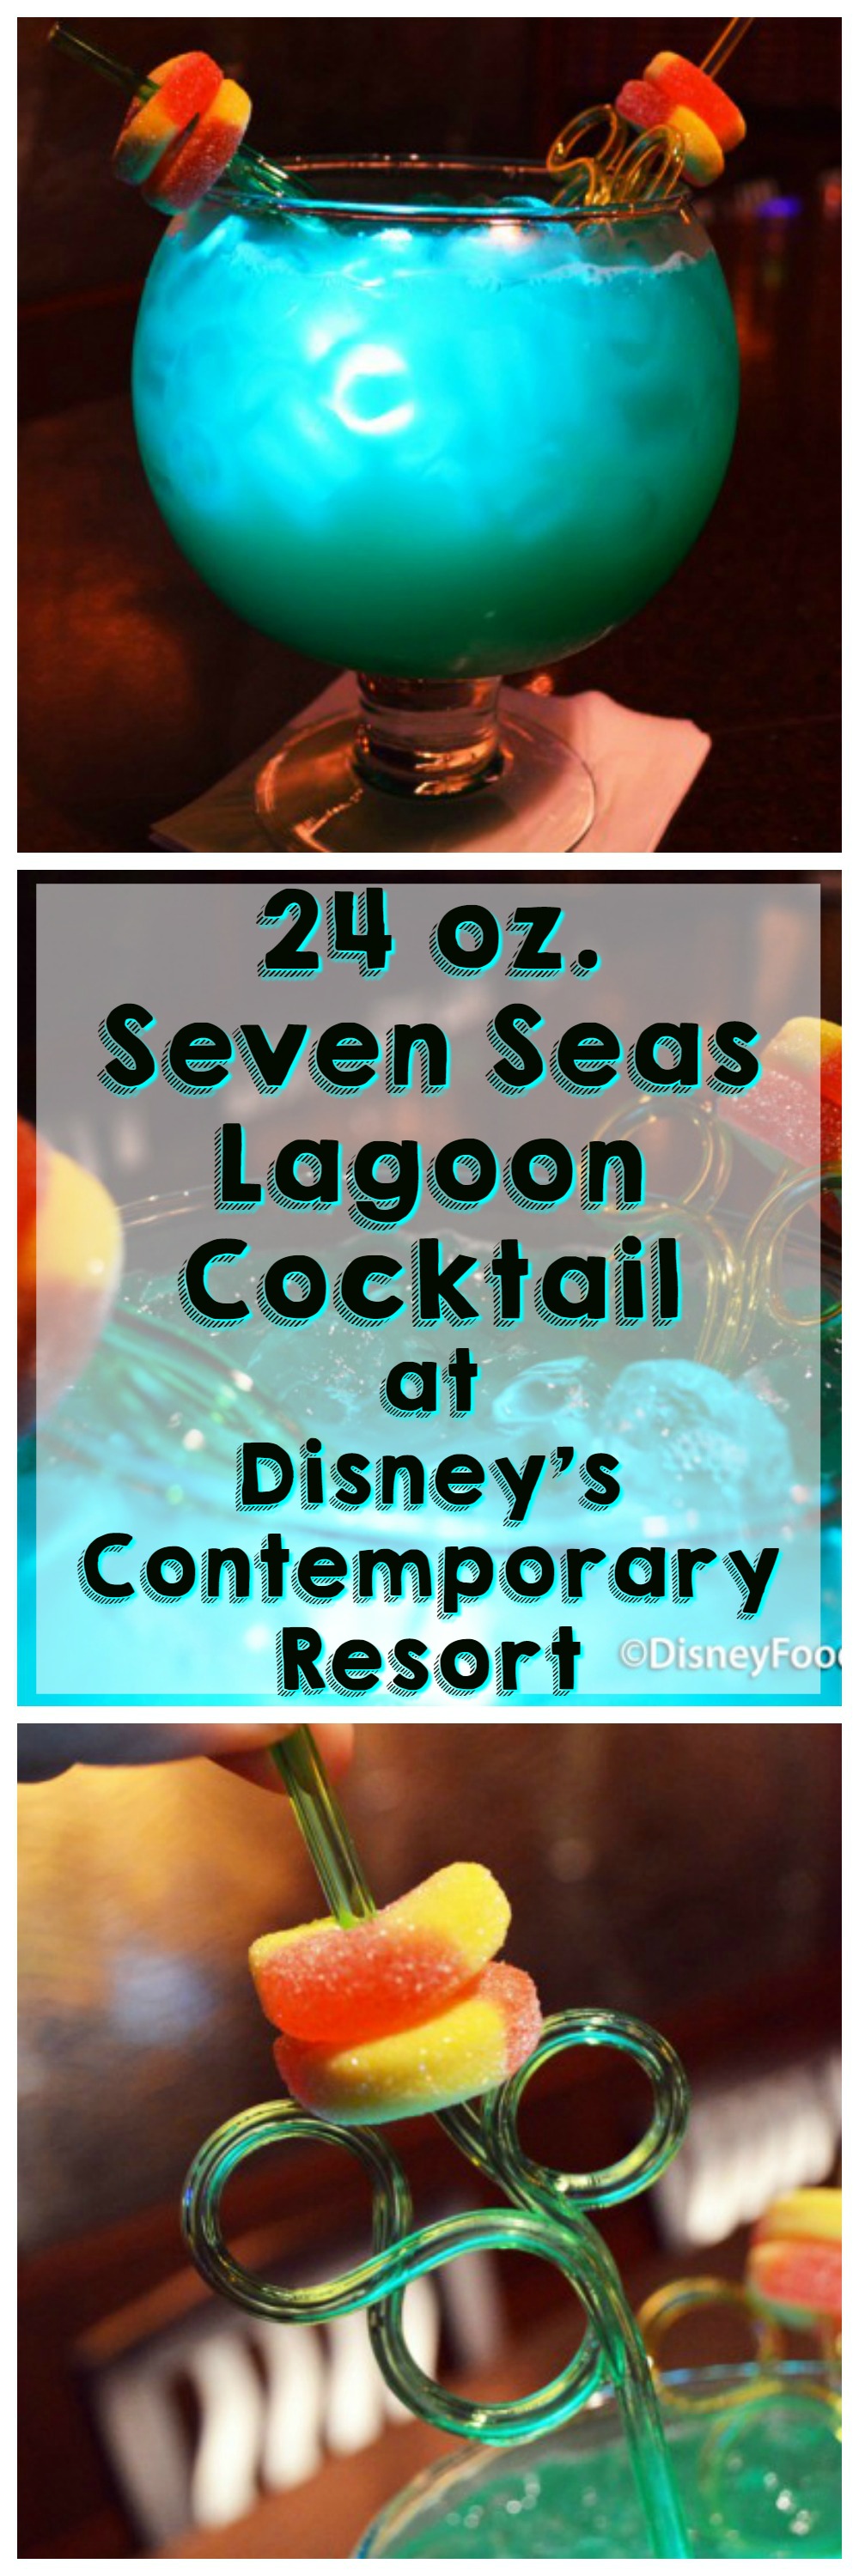 Read our review of the 24 oz. Seven Seas Lagoon Cocktail at Disney’s Contemporary Resort!